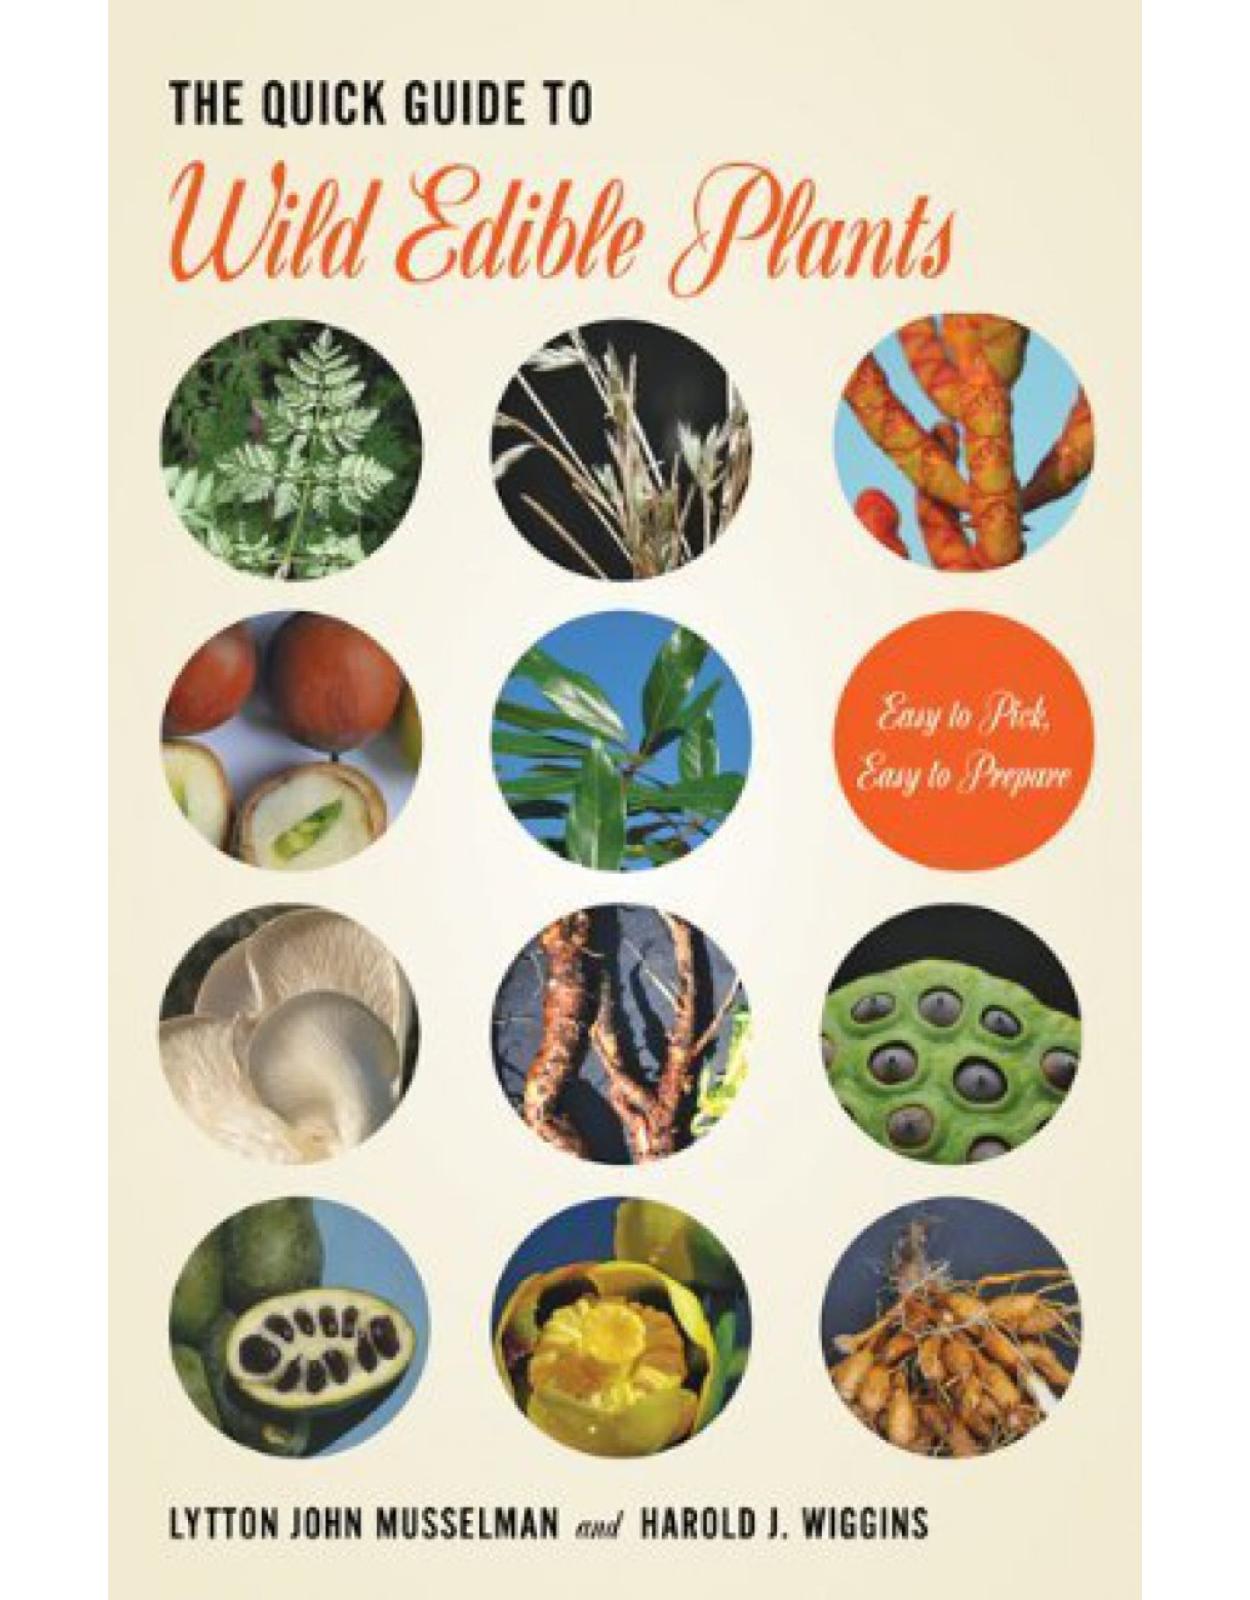 Quick Guide to Wild Edible Plants. Easy to Pick, Easy to Prepare